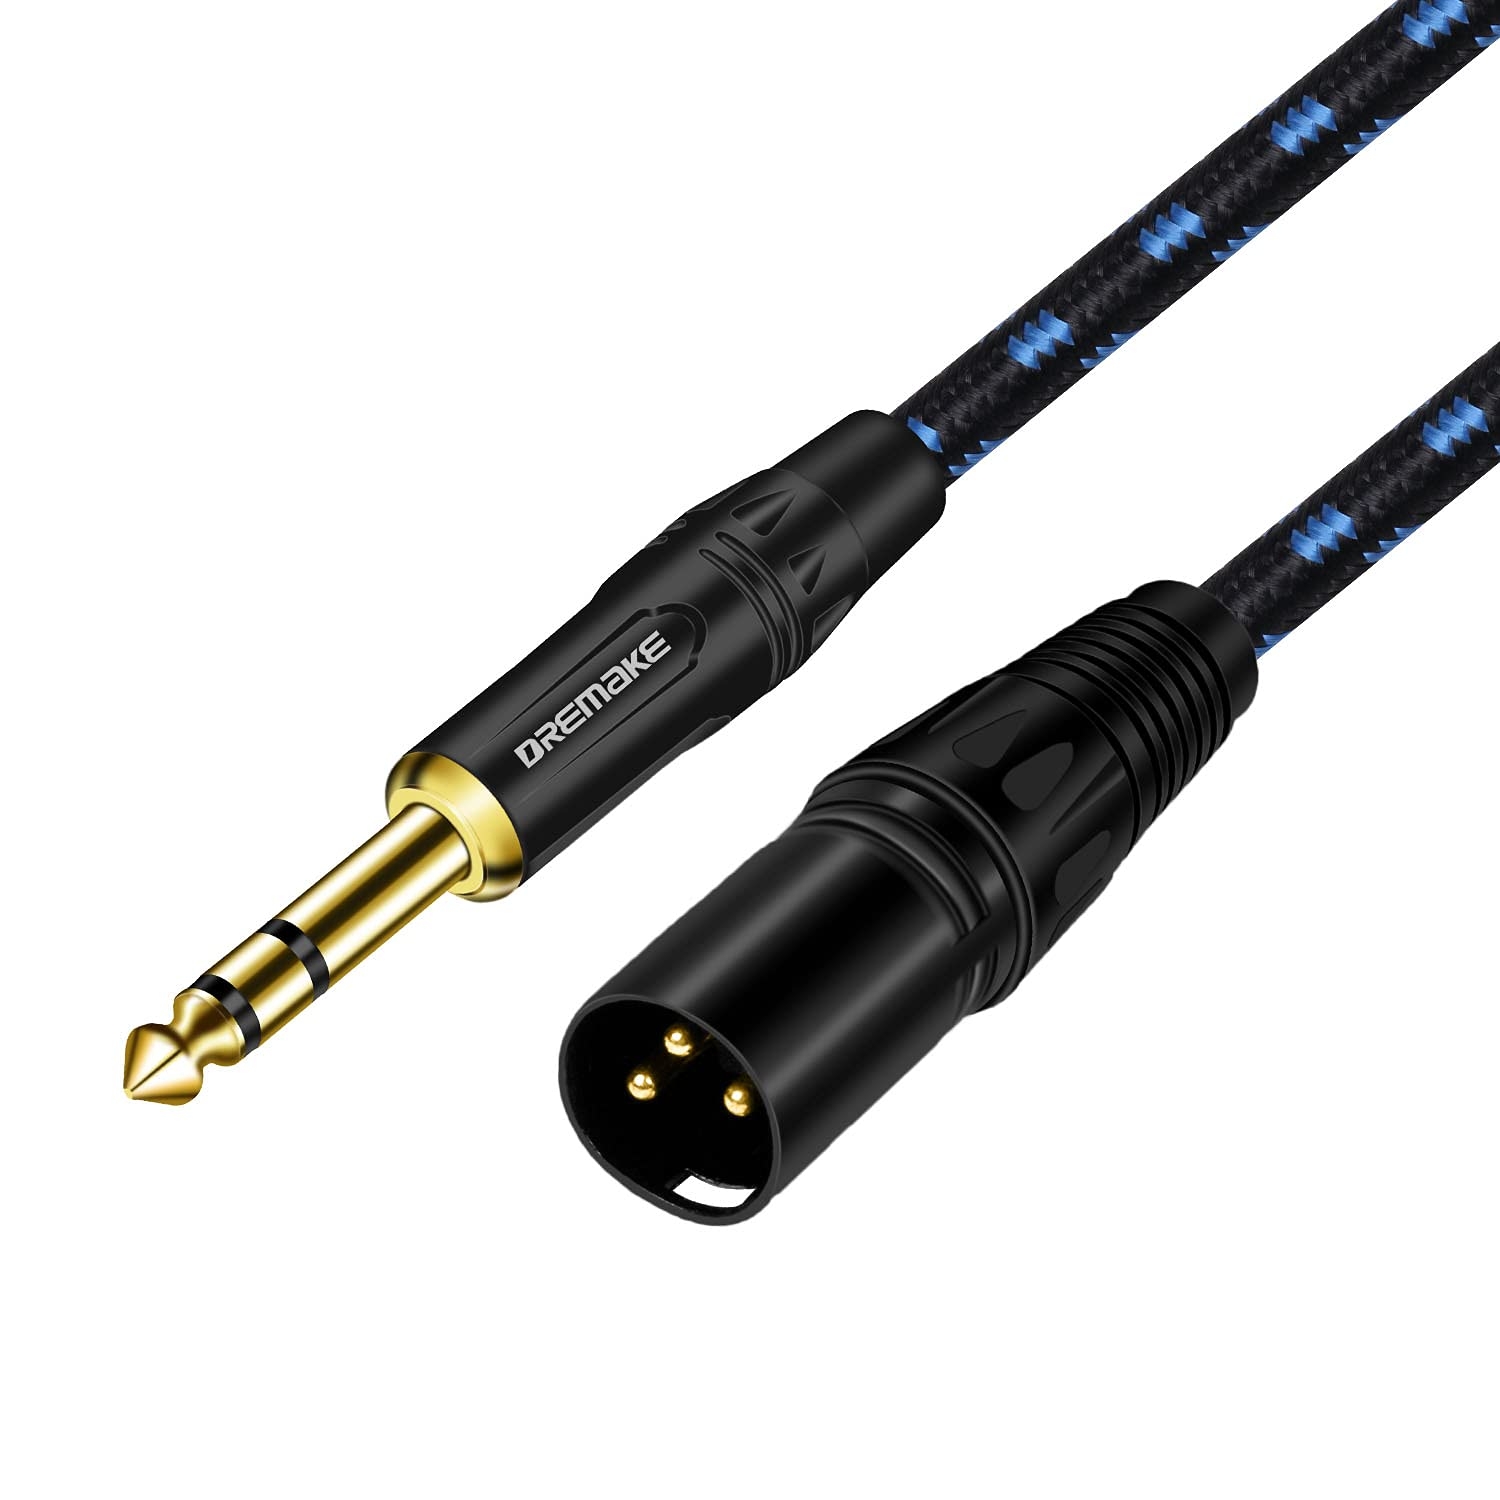 33FT XLR to 1/4 TRS Mic Audio Cable | XLR 3 Pin Male to Quarter 6.35mm/6.5mm Interconnect Patch Cord